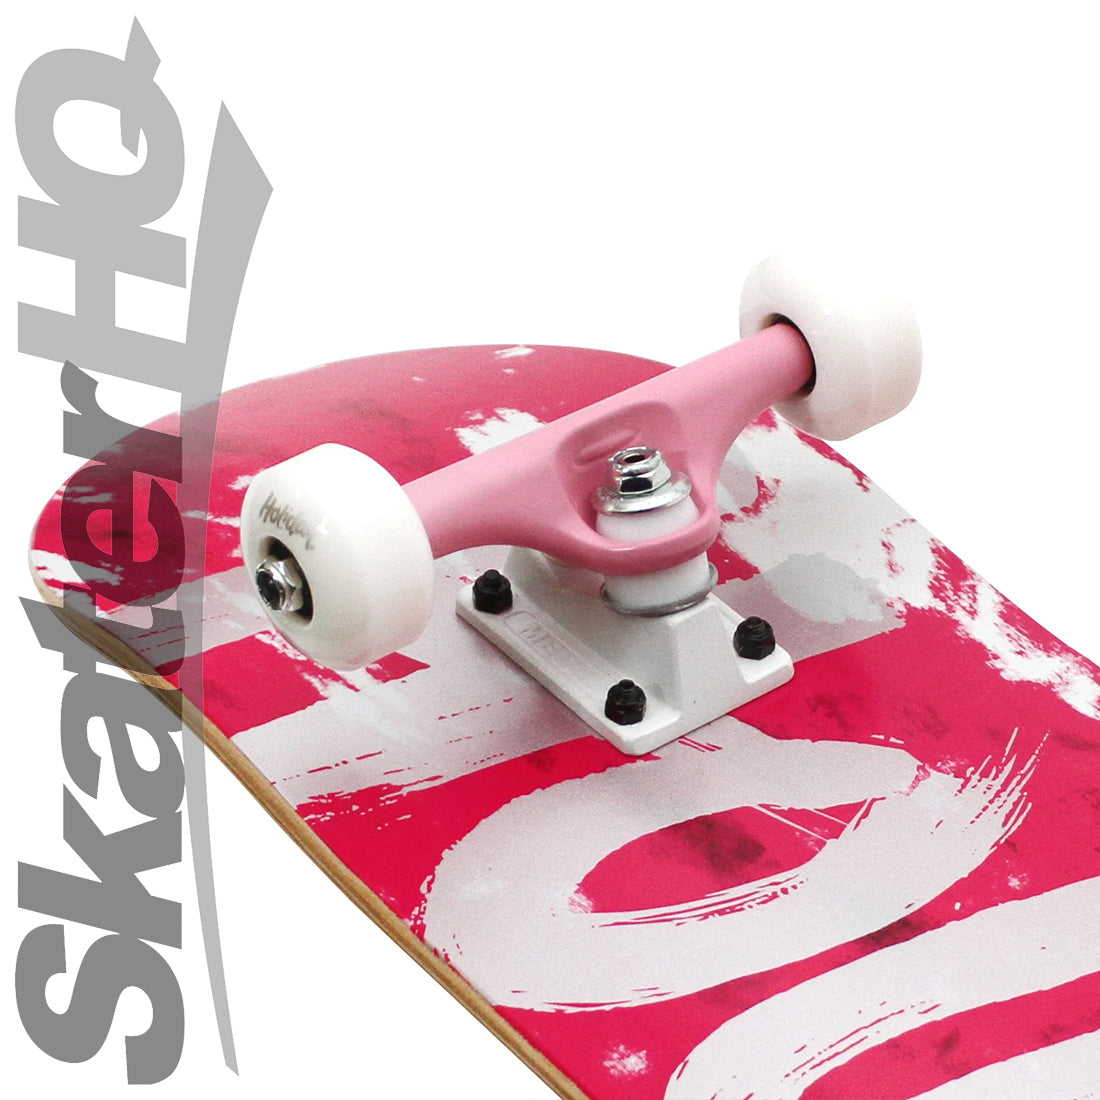 Holiday Tie Dye 7.25 Mini Complete - Pink/Silver Skateboard Completes Modern Street